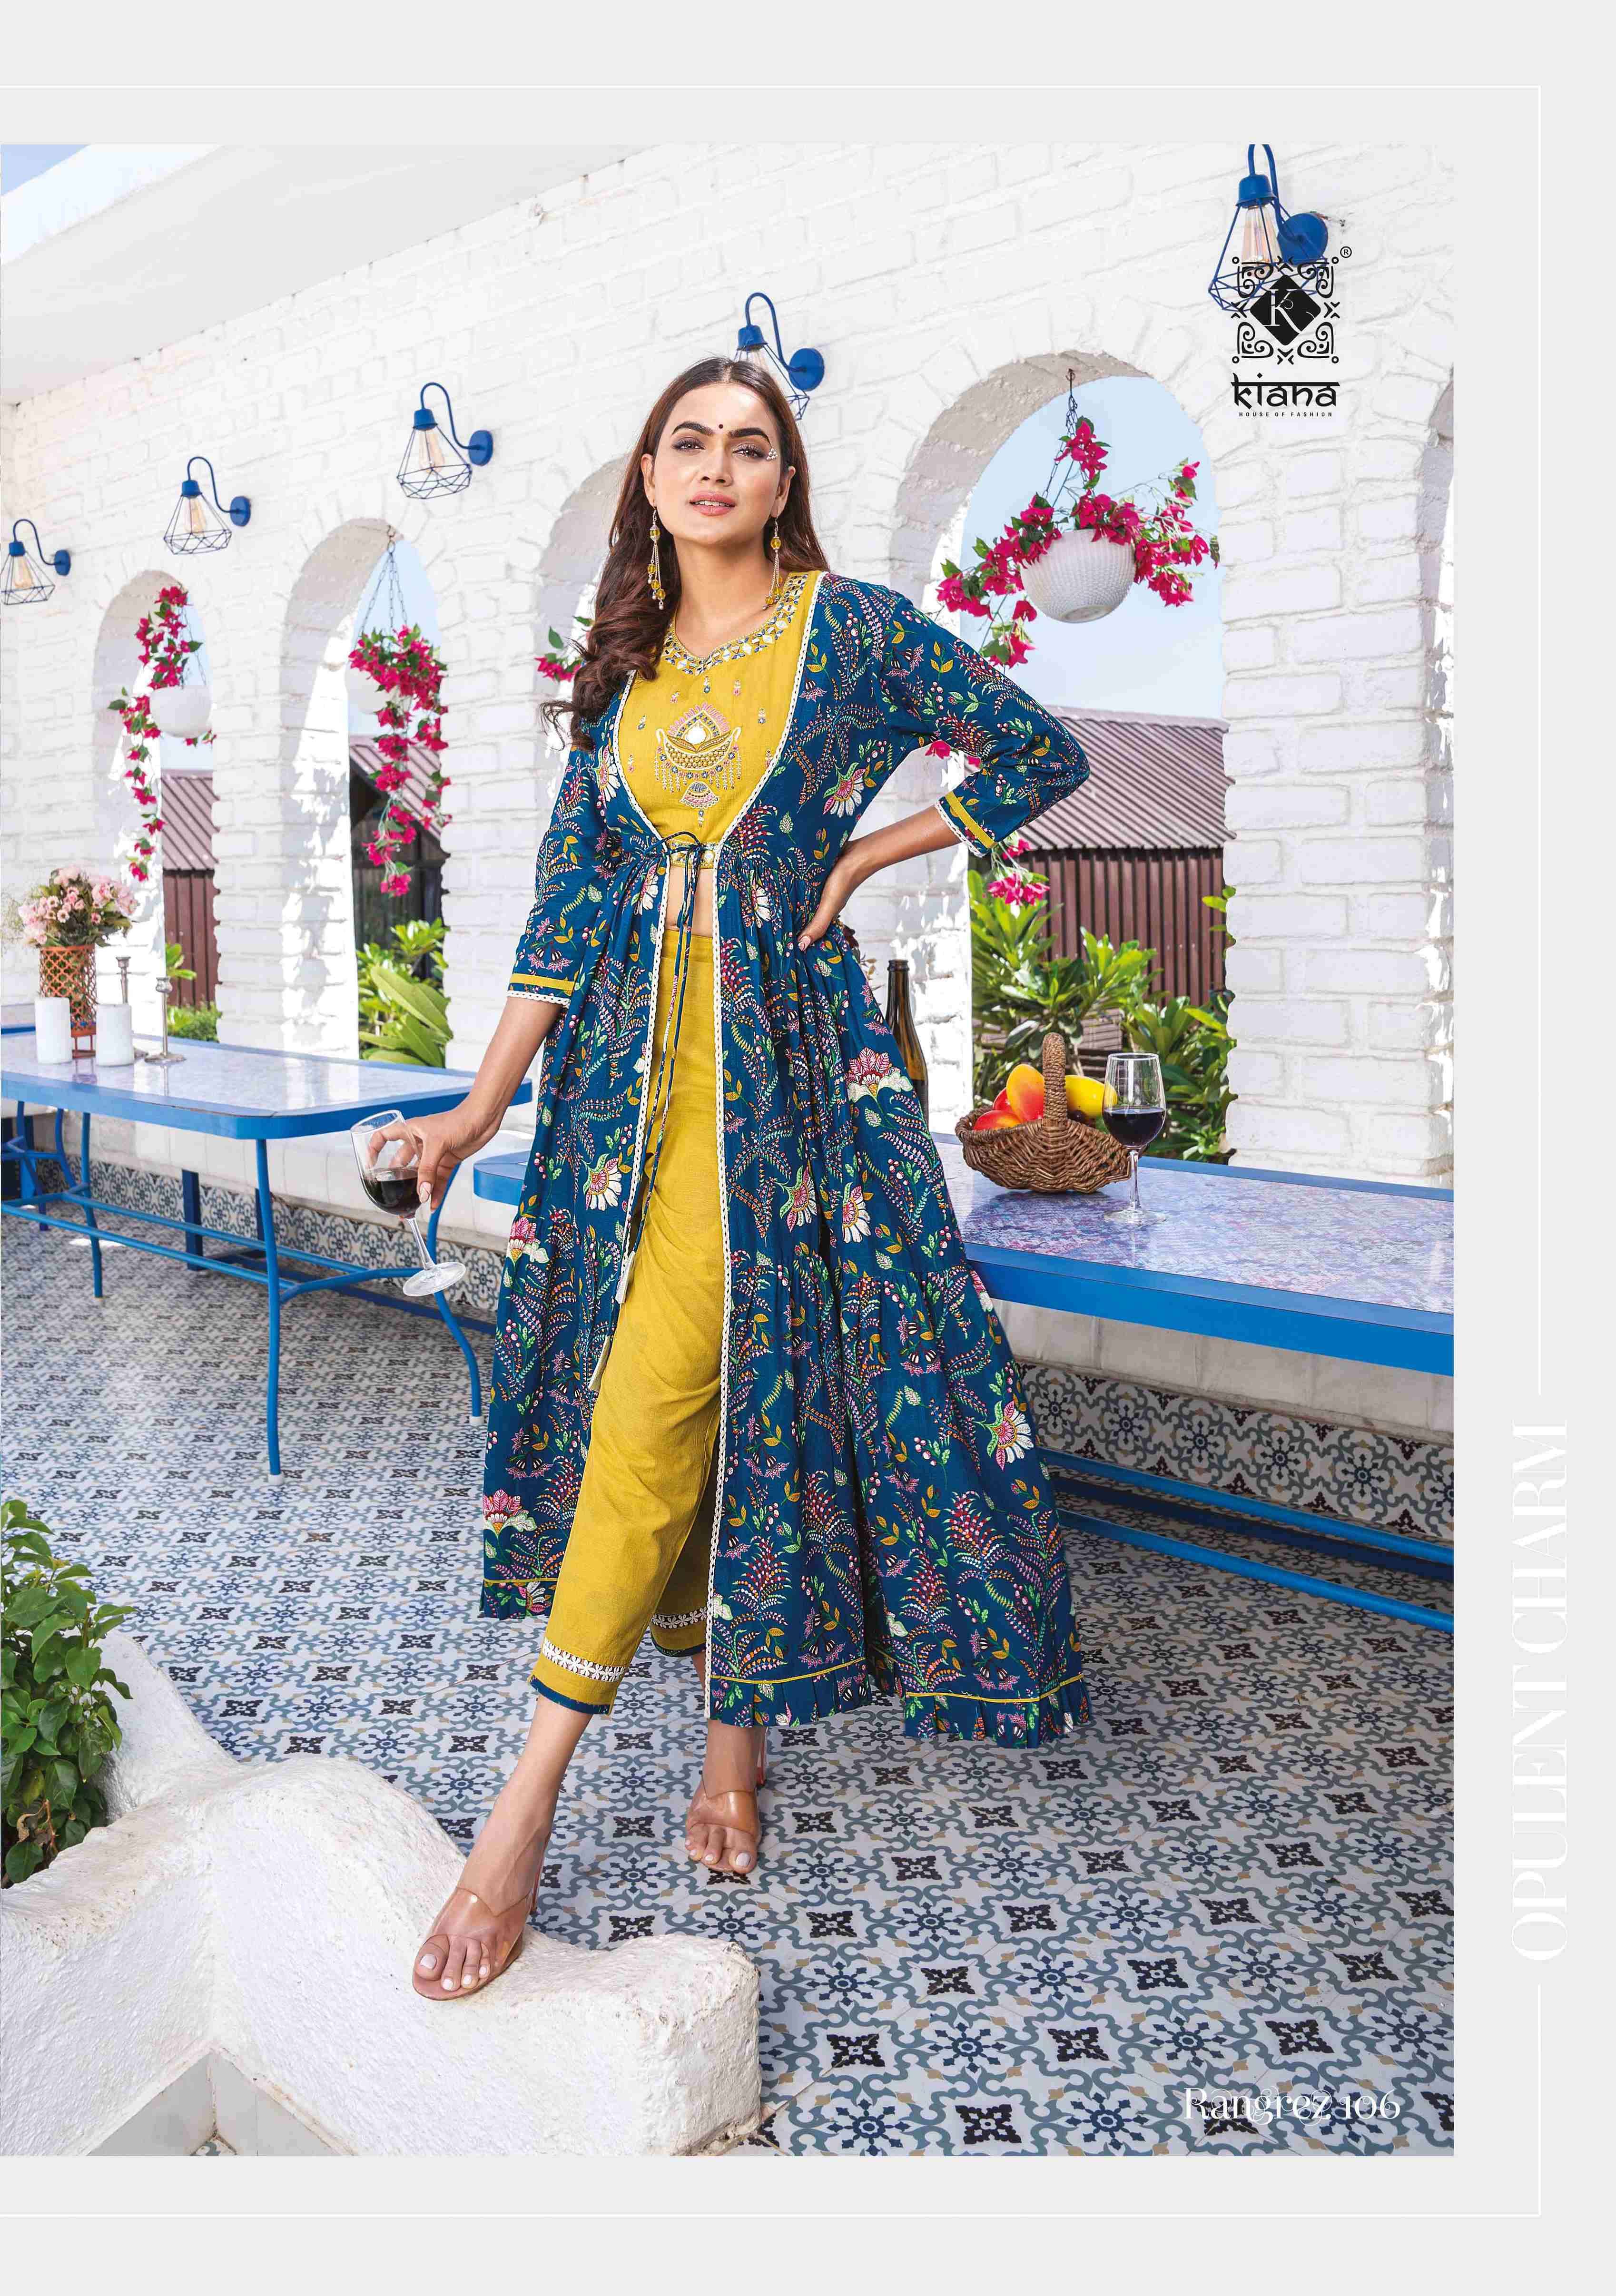 Rangrez By Kiana 101 To 106 Series Designer Stylish Fancy Colorful Beautiful Party Wear & Ethnic Wear Collection Pure Cotton Tops With Bottom At Wholesale Price